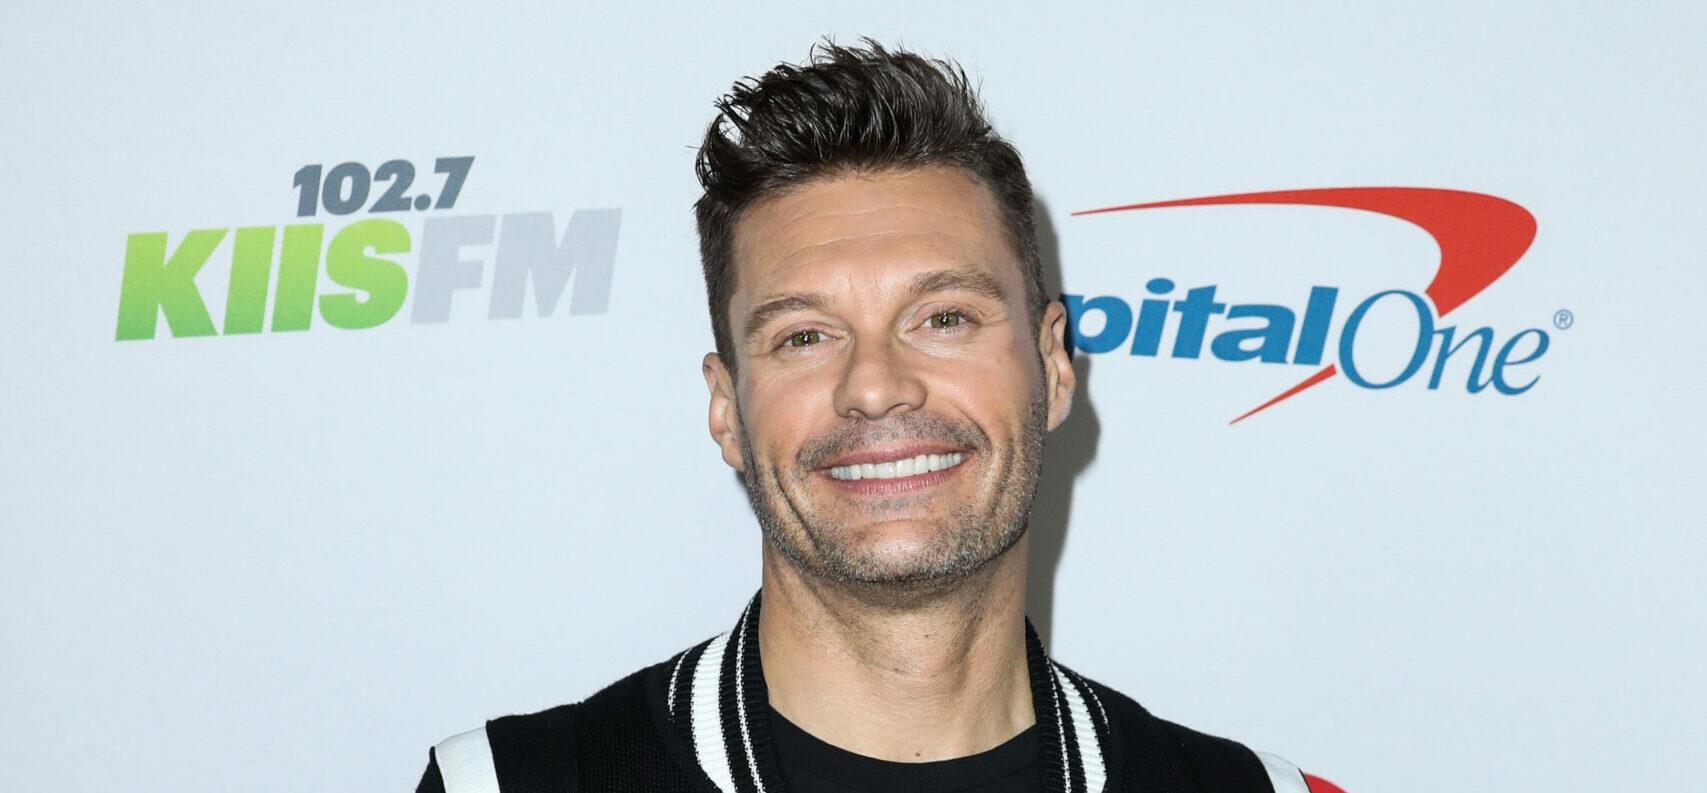 Ryan Seacrest Shares His Thoughts On Mark Consuelos’ Performance On ‘Live’ So Far